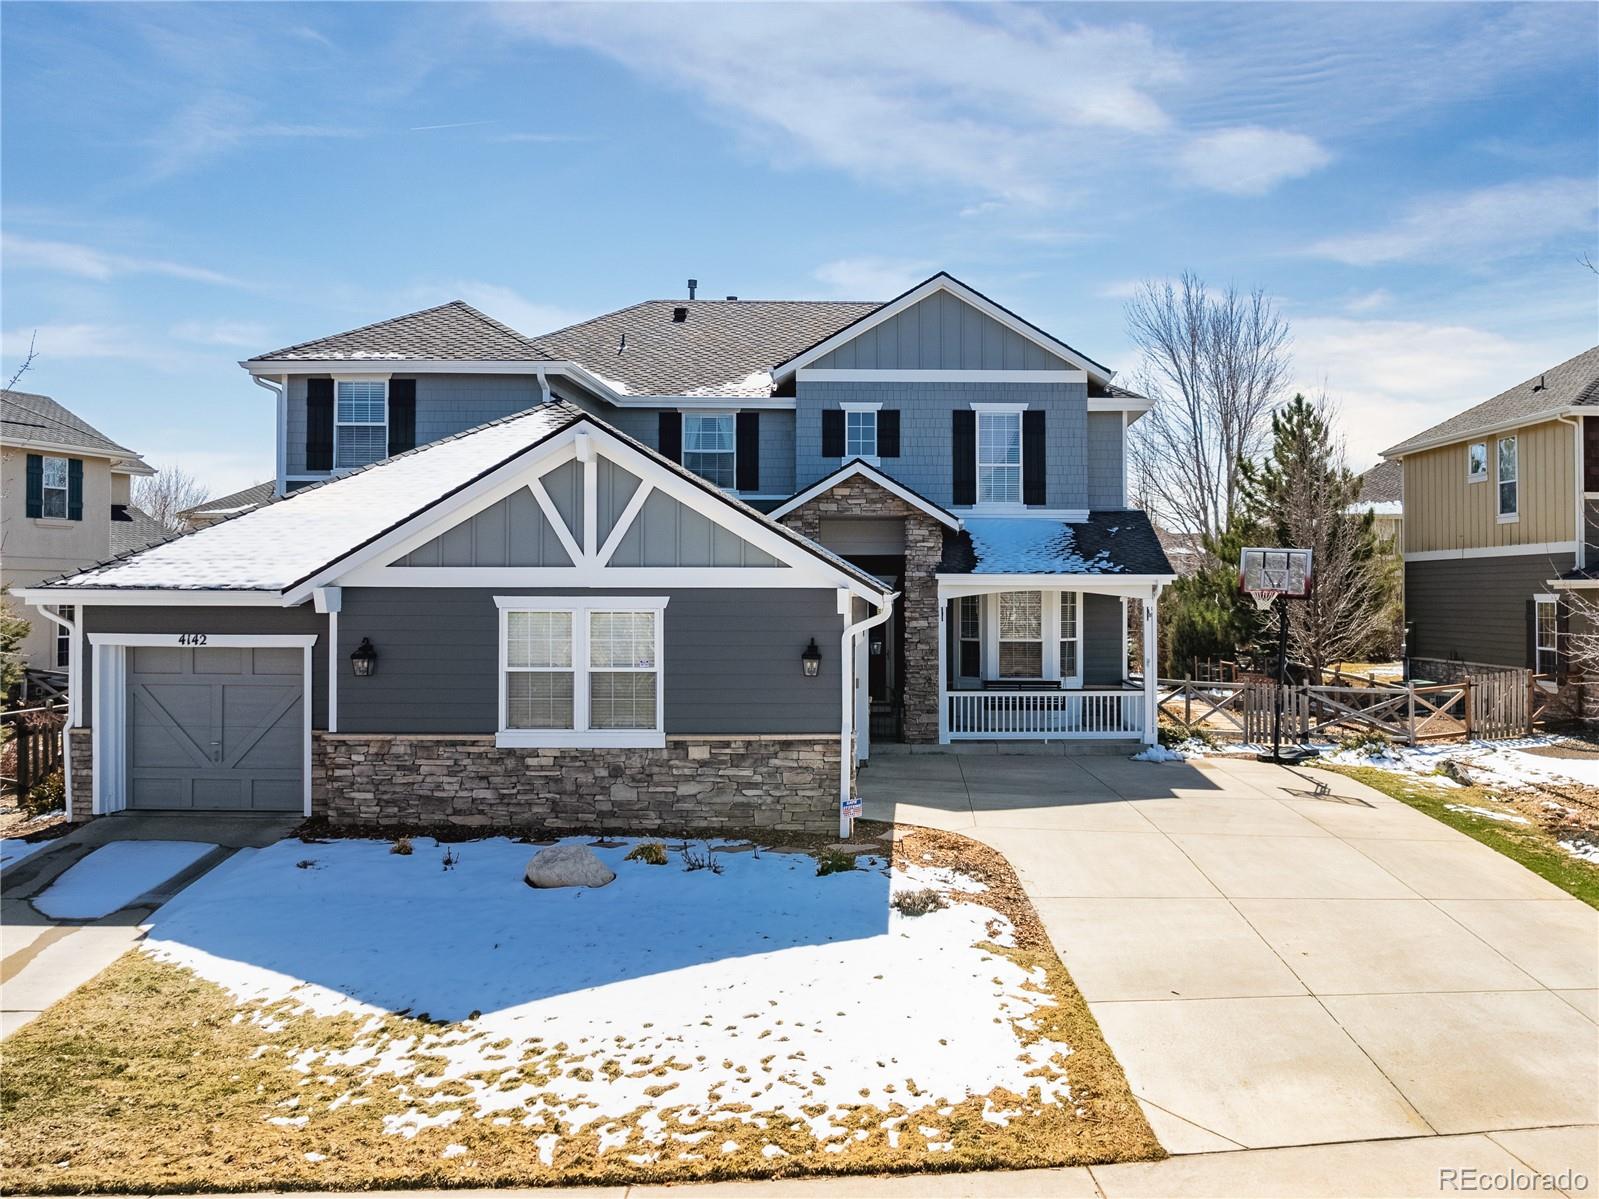 4142 105th, Westminster, CO